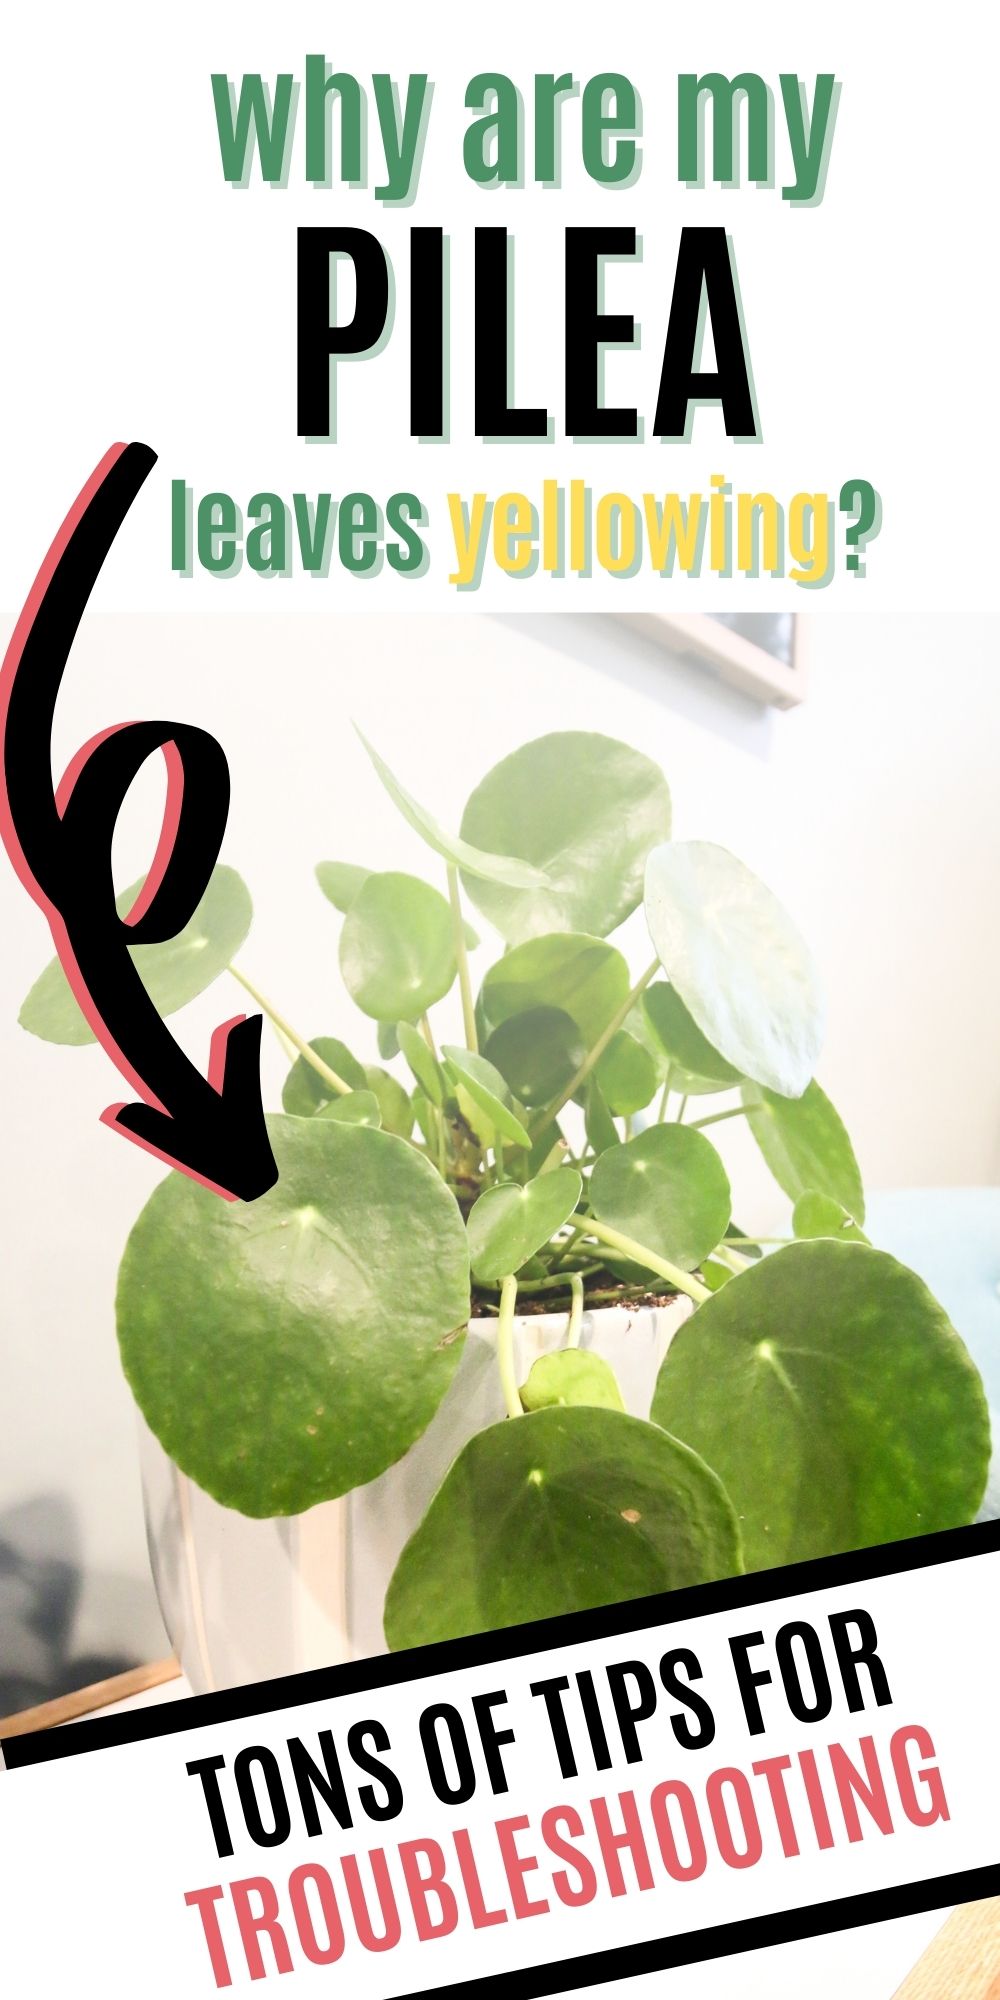 Why are my pilea leaves turning yellow?